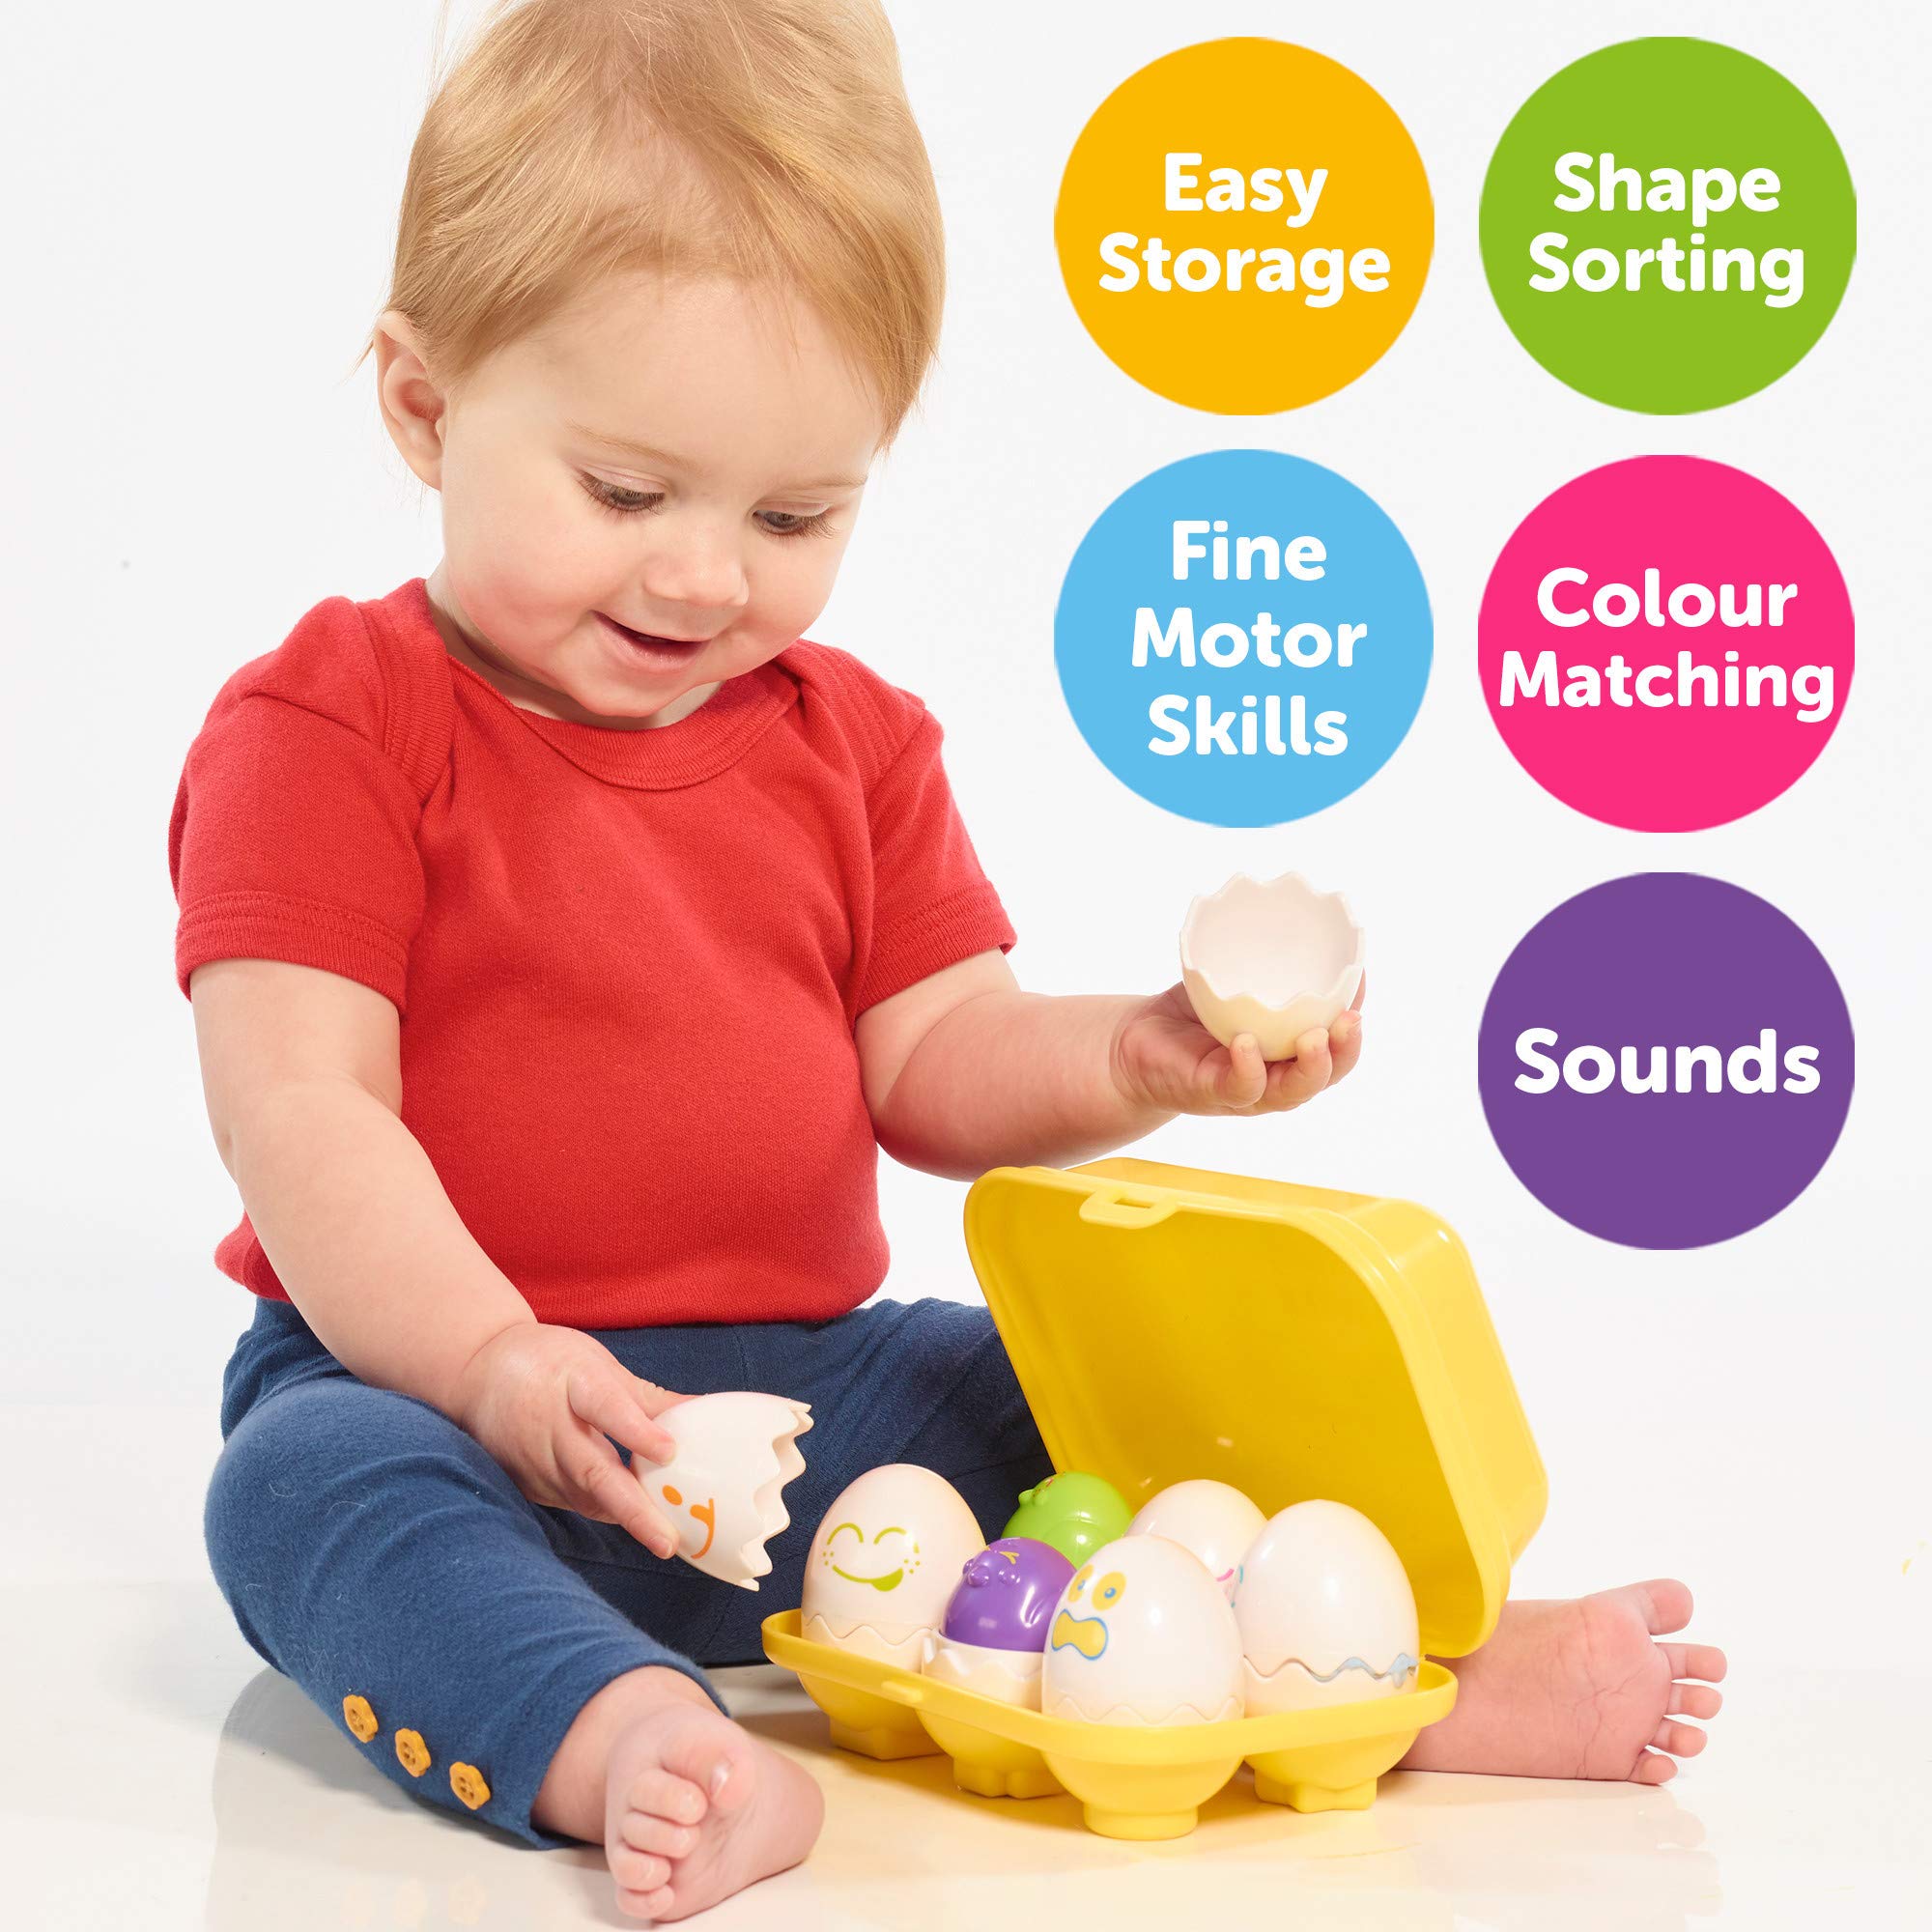 TOMY Toomies Hide & Squeak Easter Eggs Toddler Toys - Matching & Sorting Learning Toys - Sensory Toys for Boys and Girls 18 Months and Up